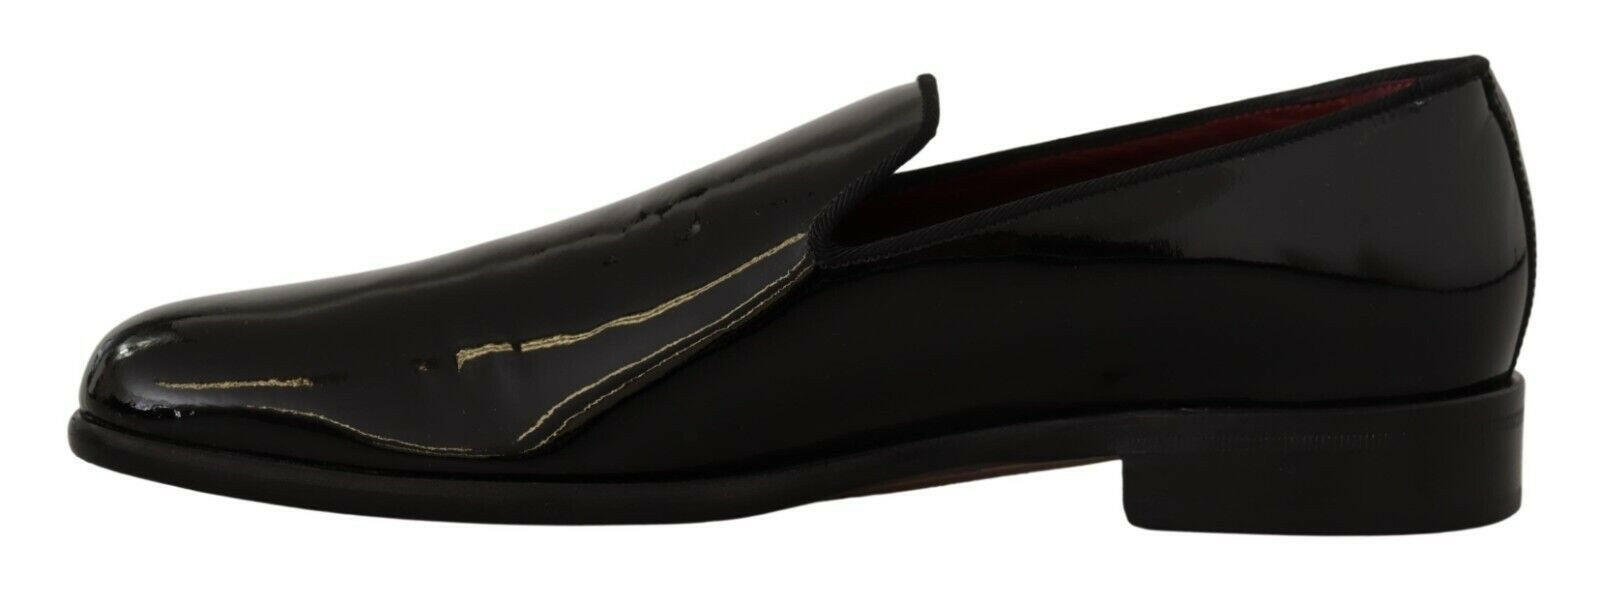 Dolce & Gabbana Black Patent Leather Formal Loafers Dress Shoes - GENUINE AUTHENTIC BRAND LLC  